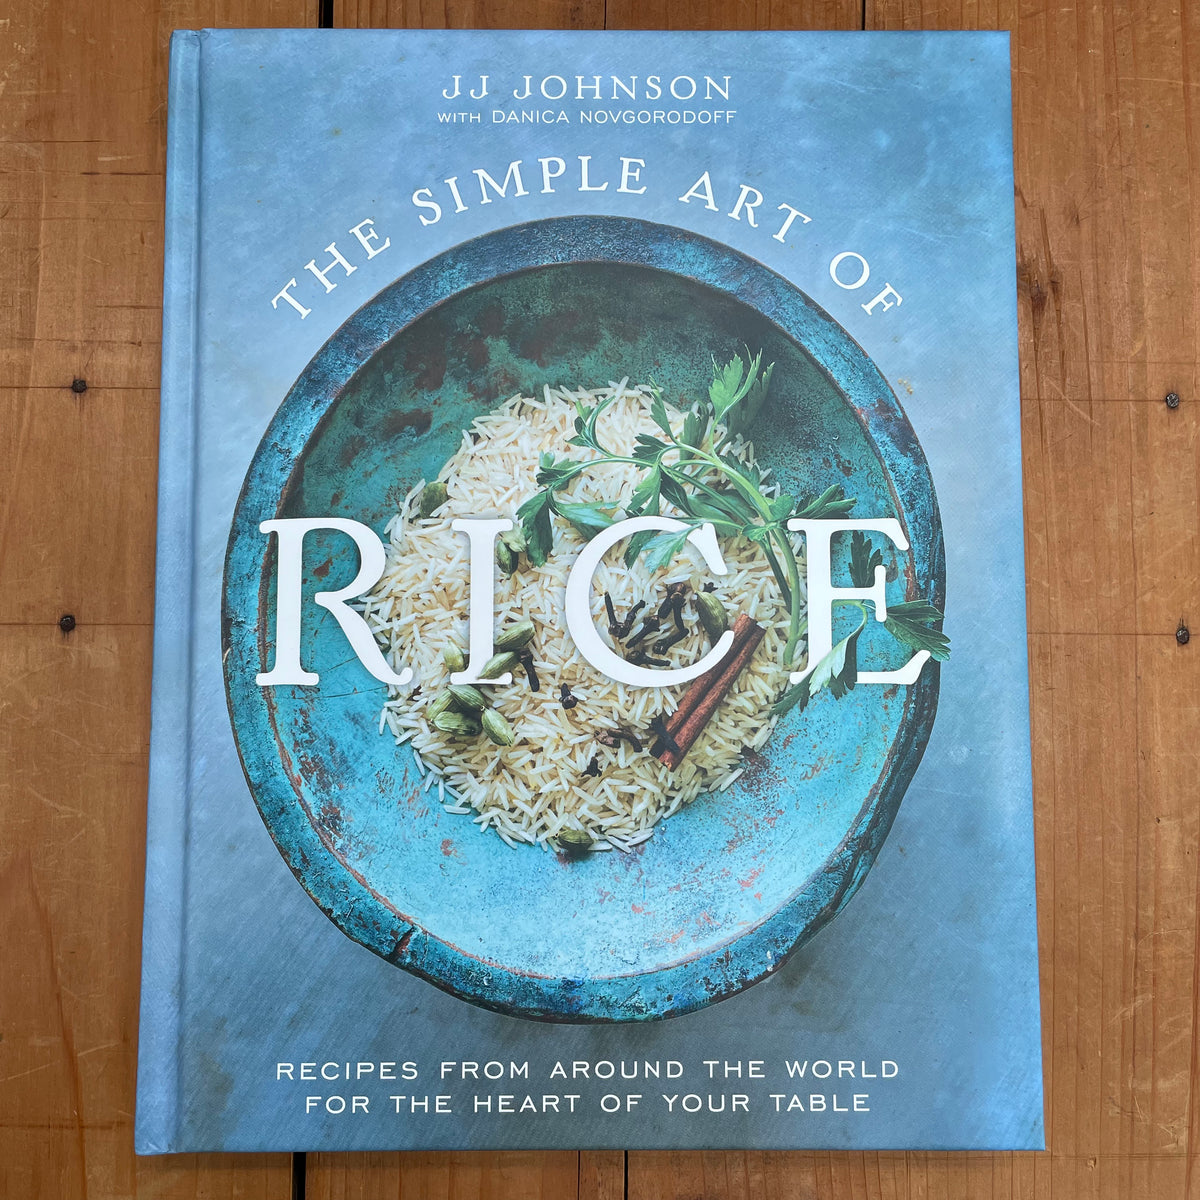 The Simple Art of Rice: Recipes from Around the World for the Heart of Your Table - JJ Johnson